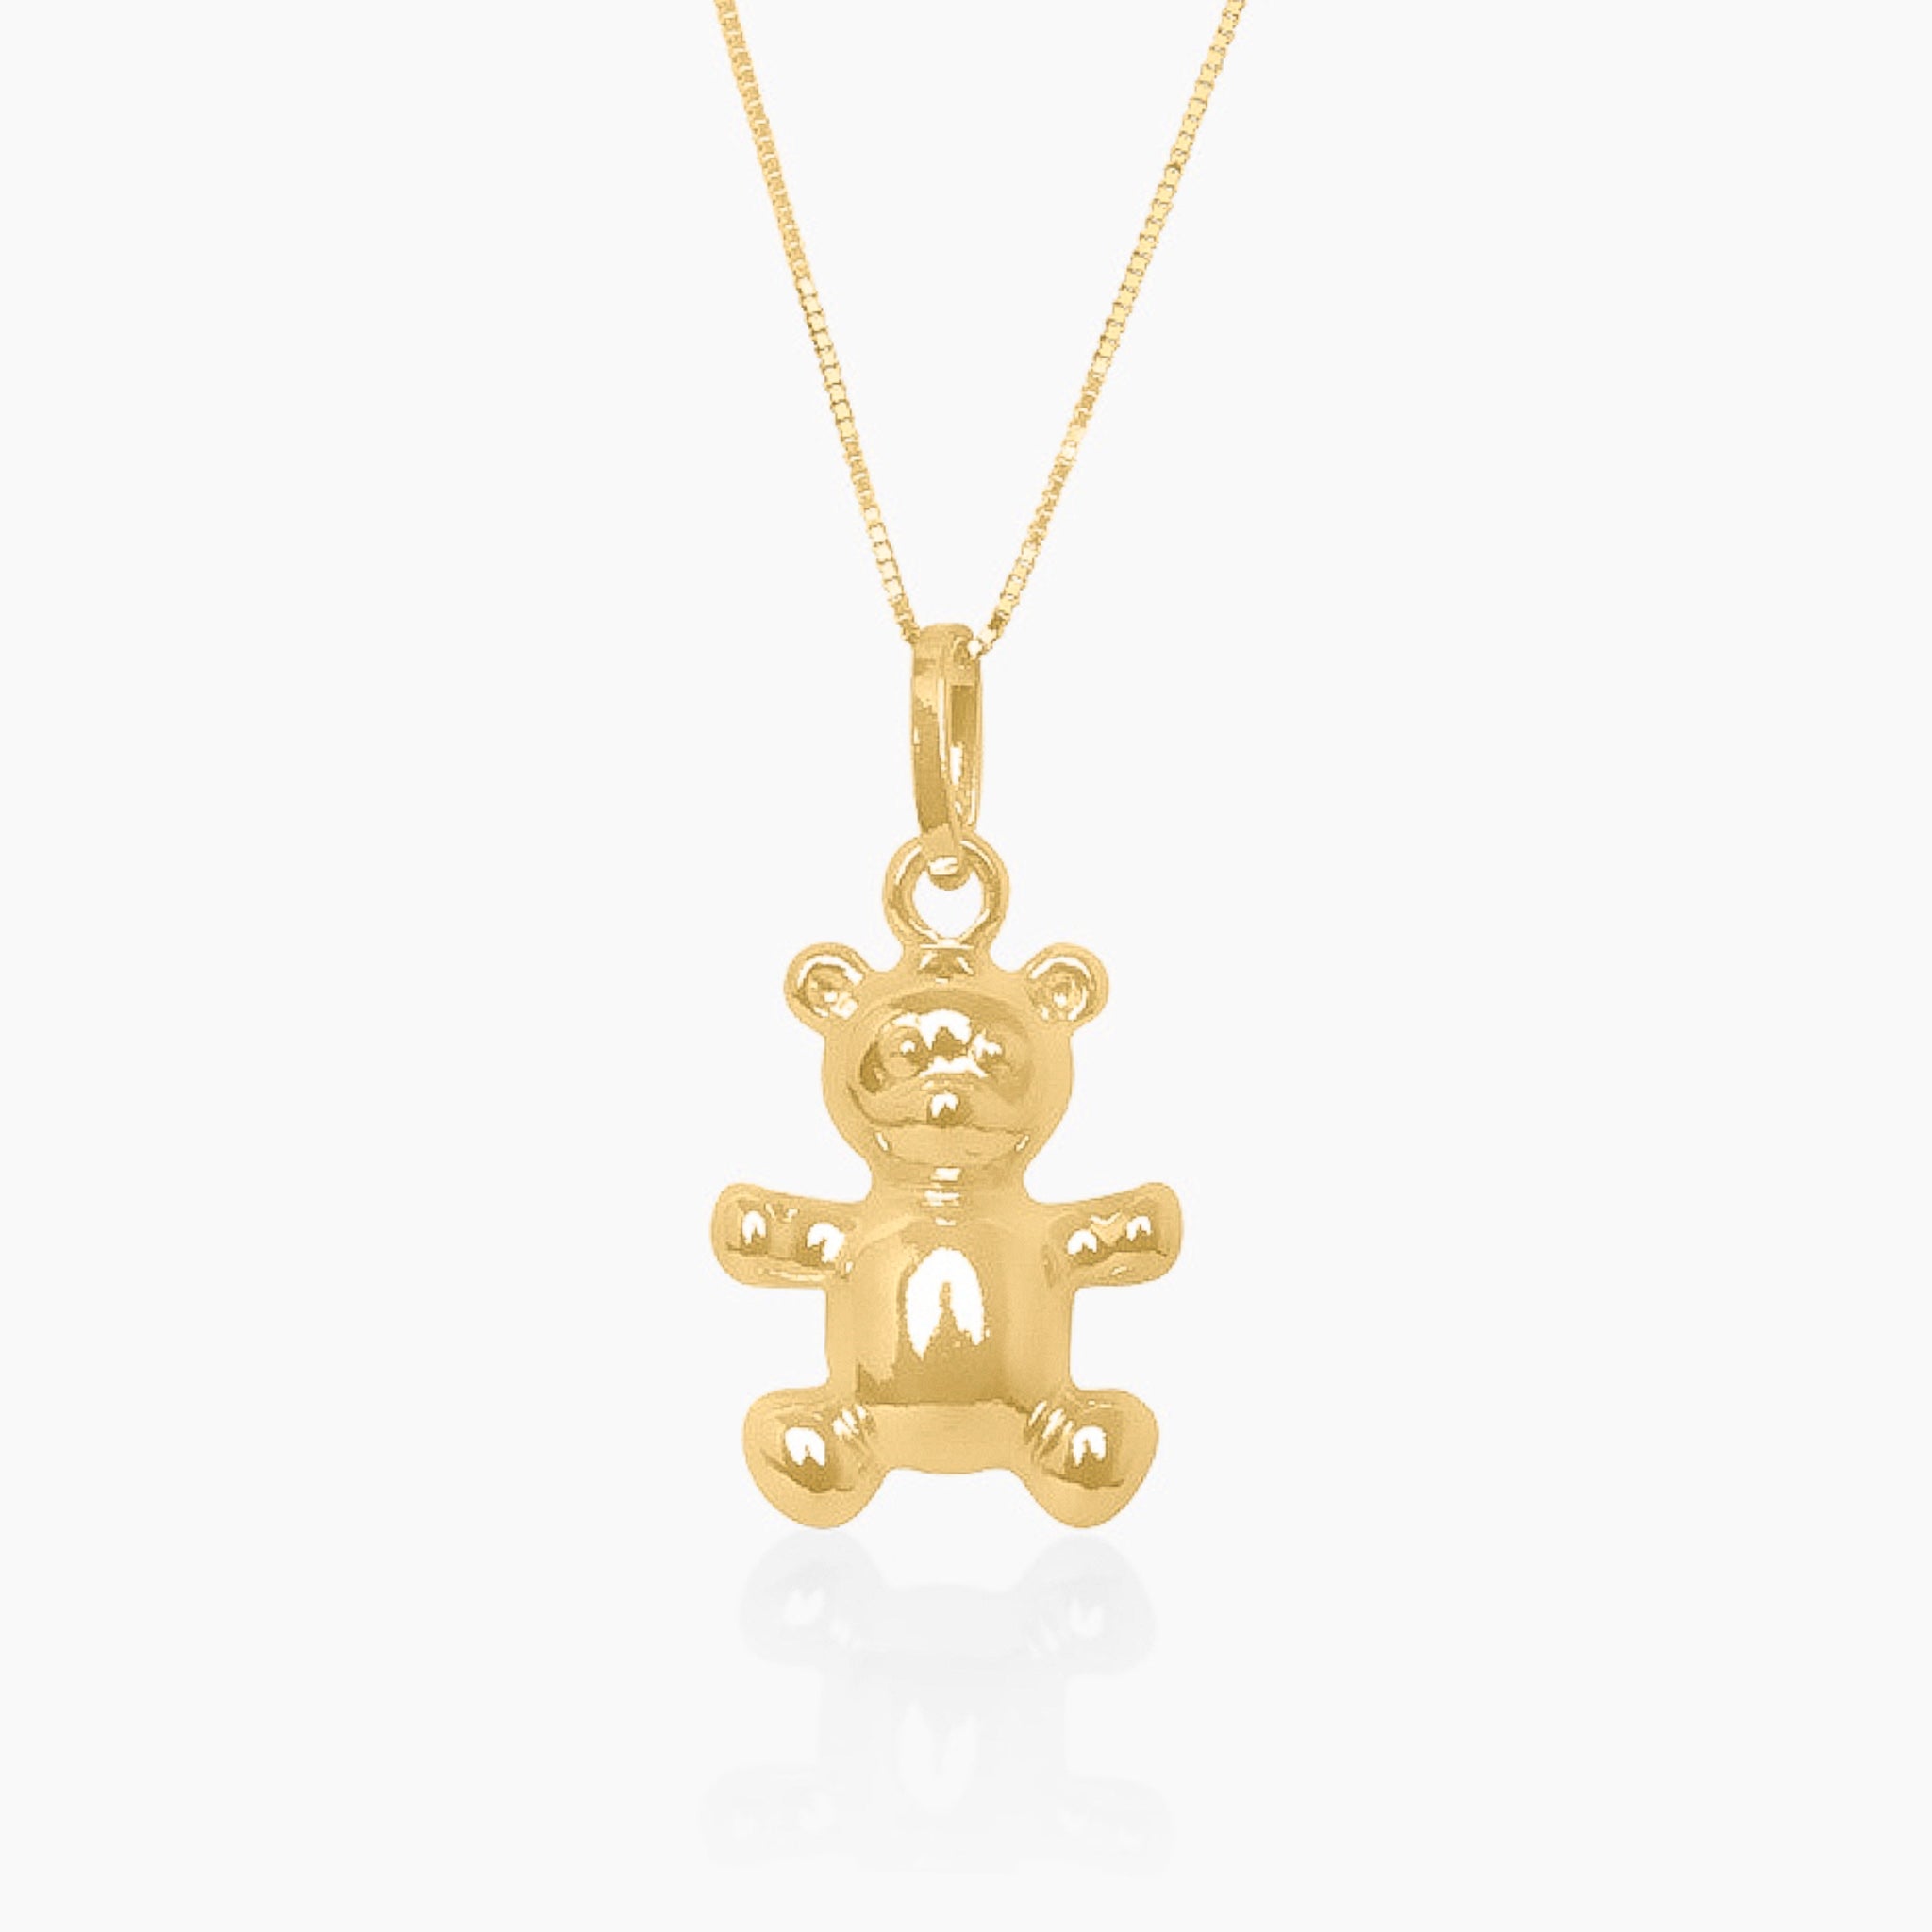 14K YELLOW GOLD BUBBLE TEDDY BEAR NECKLACE